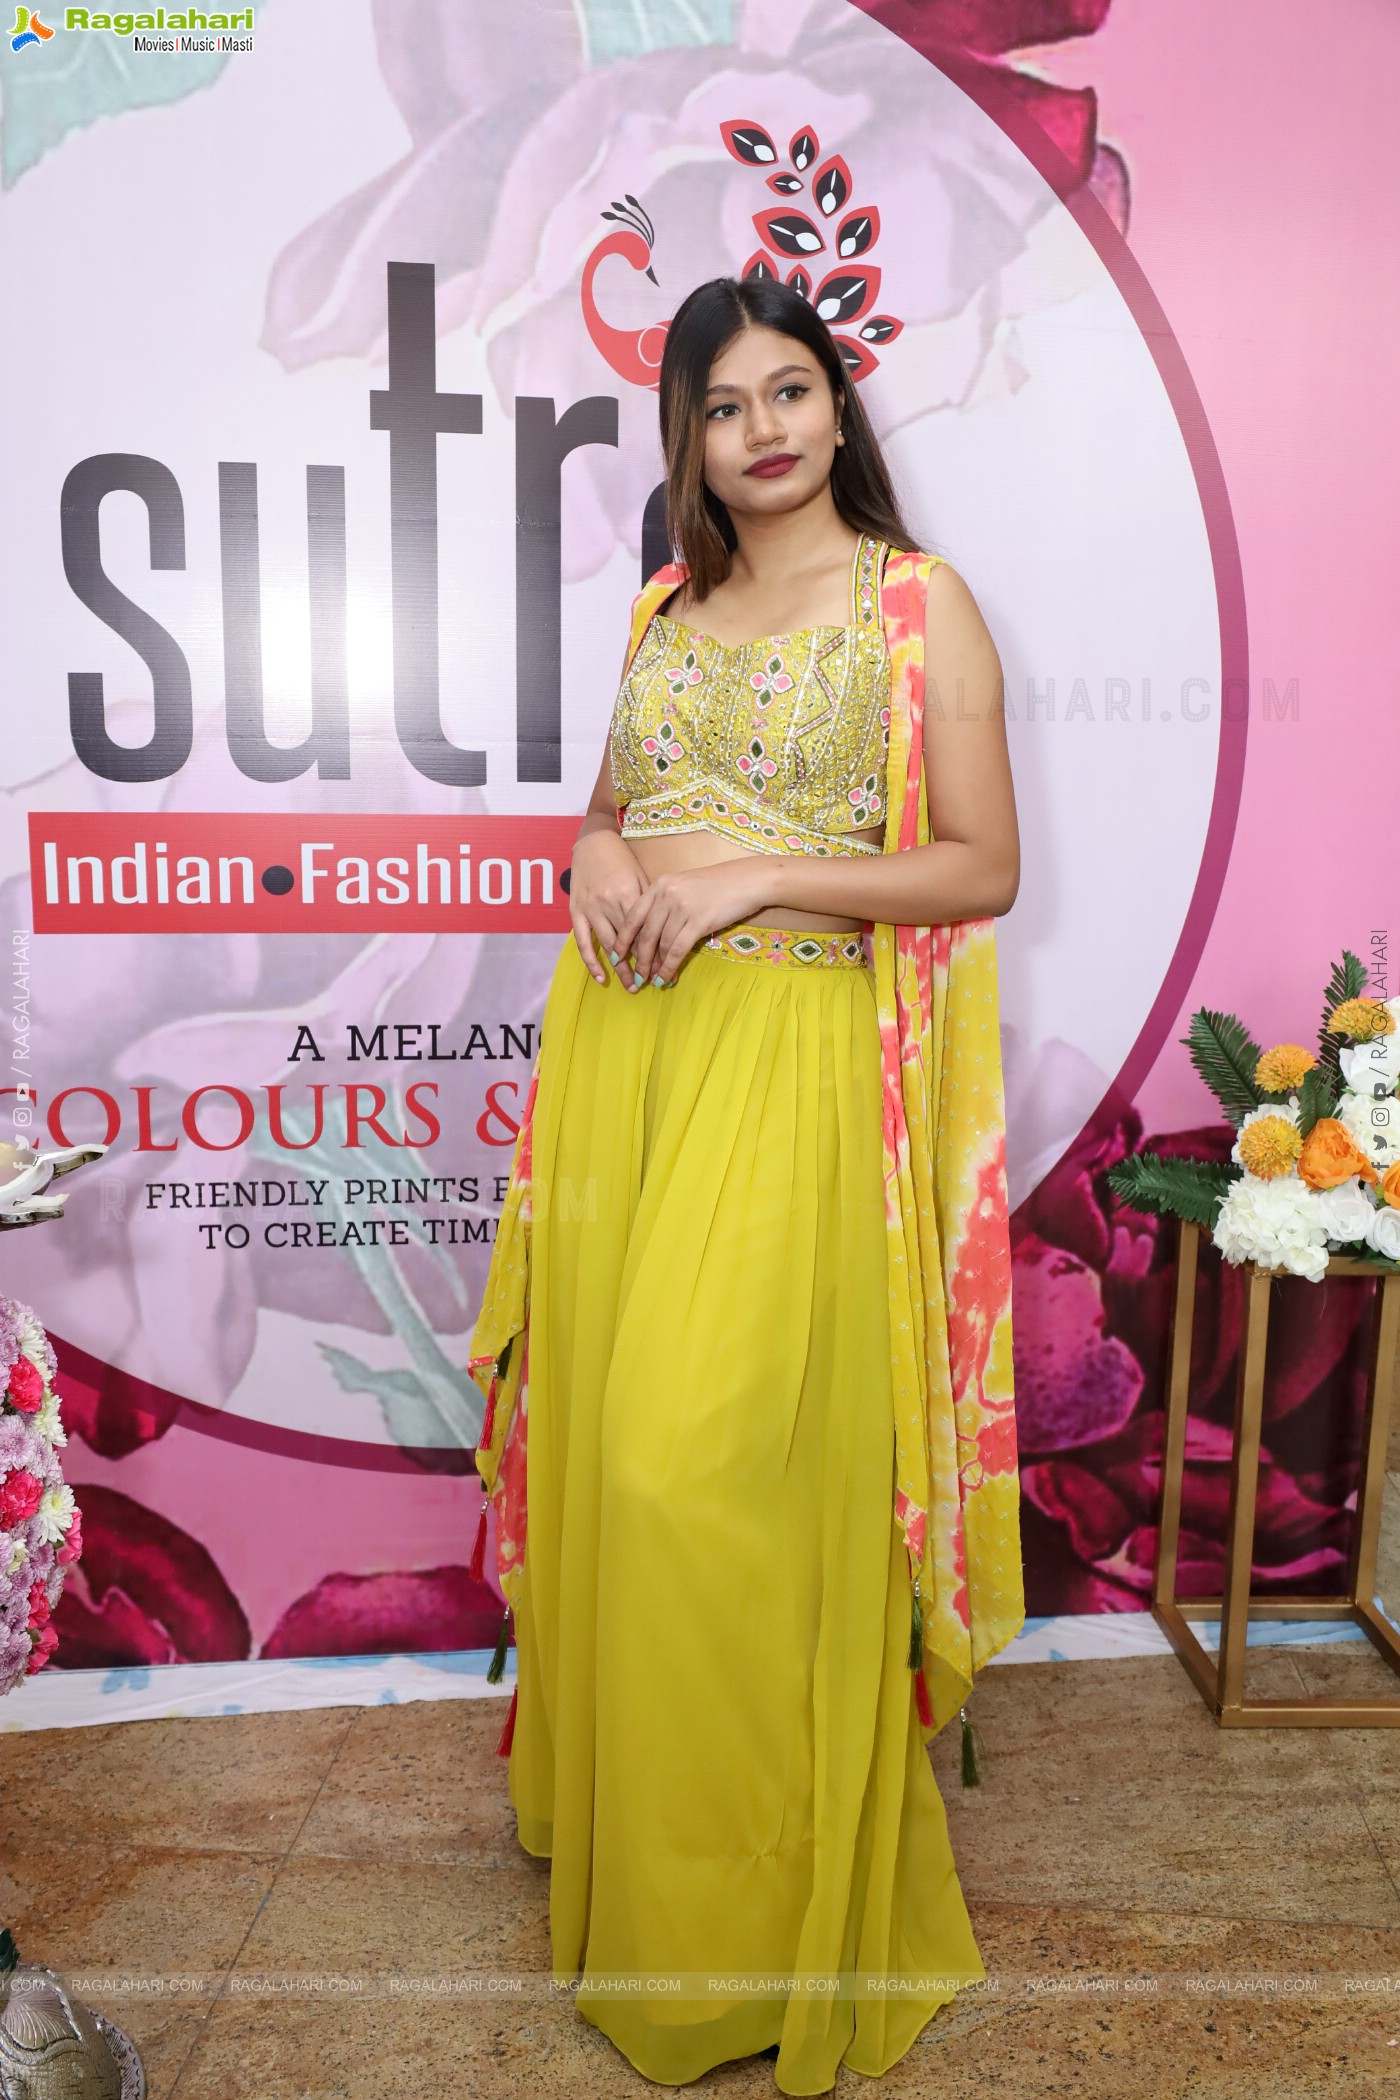 Sutraa Exhibition, Hyderabad inaugurated by Rithu Chowdary